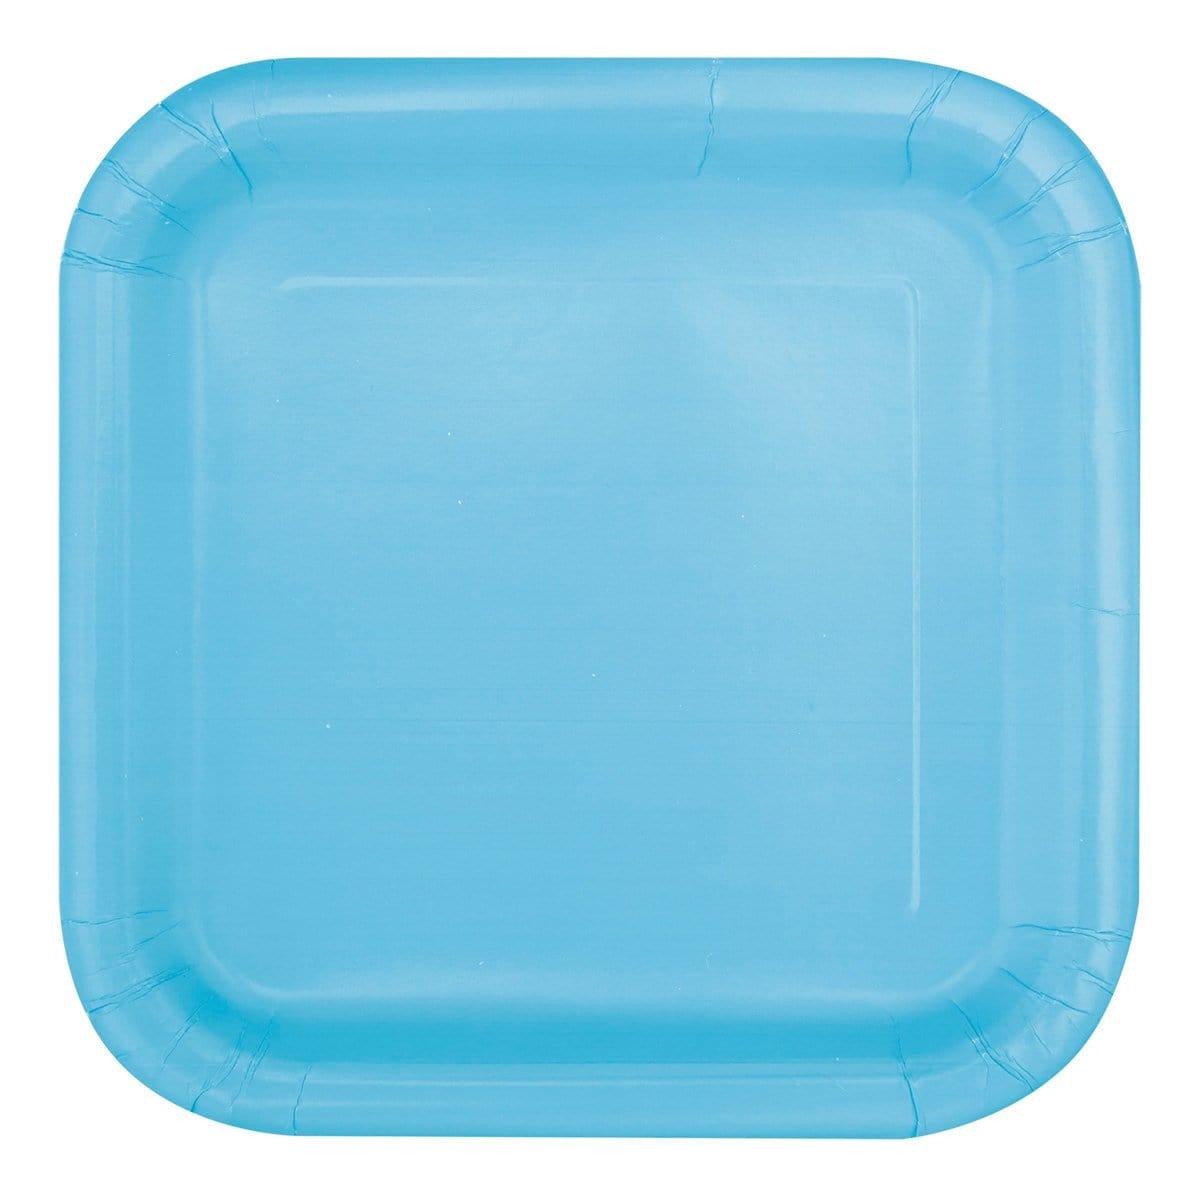 Buy Plasticware Square Plates - Caribbean Blue 7 in. 16/pkg sold at Party Expert